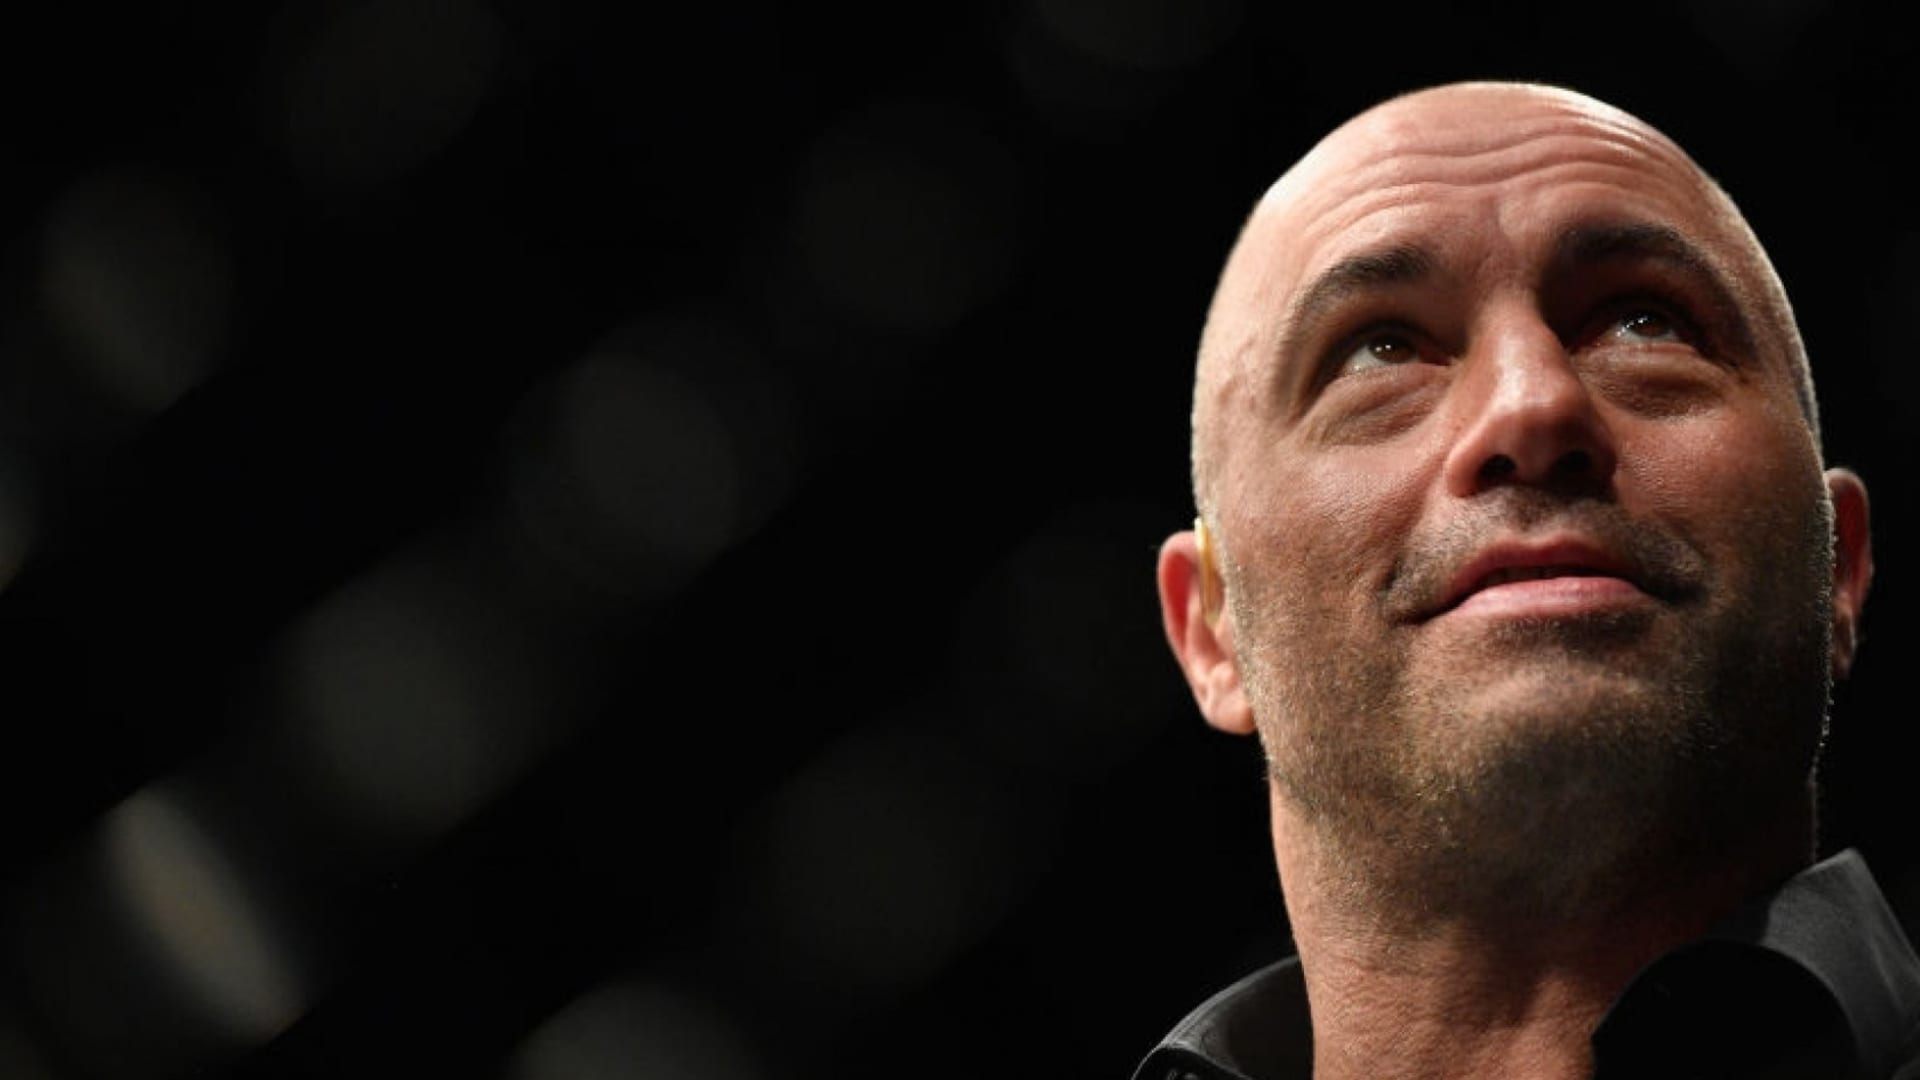 Joe Rogan Just Posted His Response to Spotify's Big Controversy. These 2 Words Mattered Most